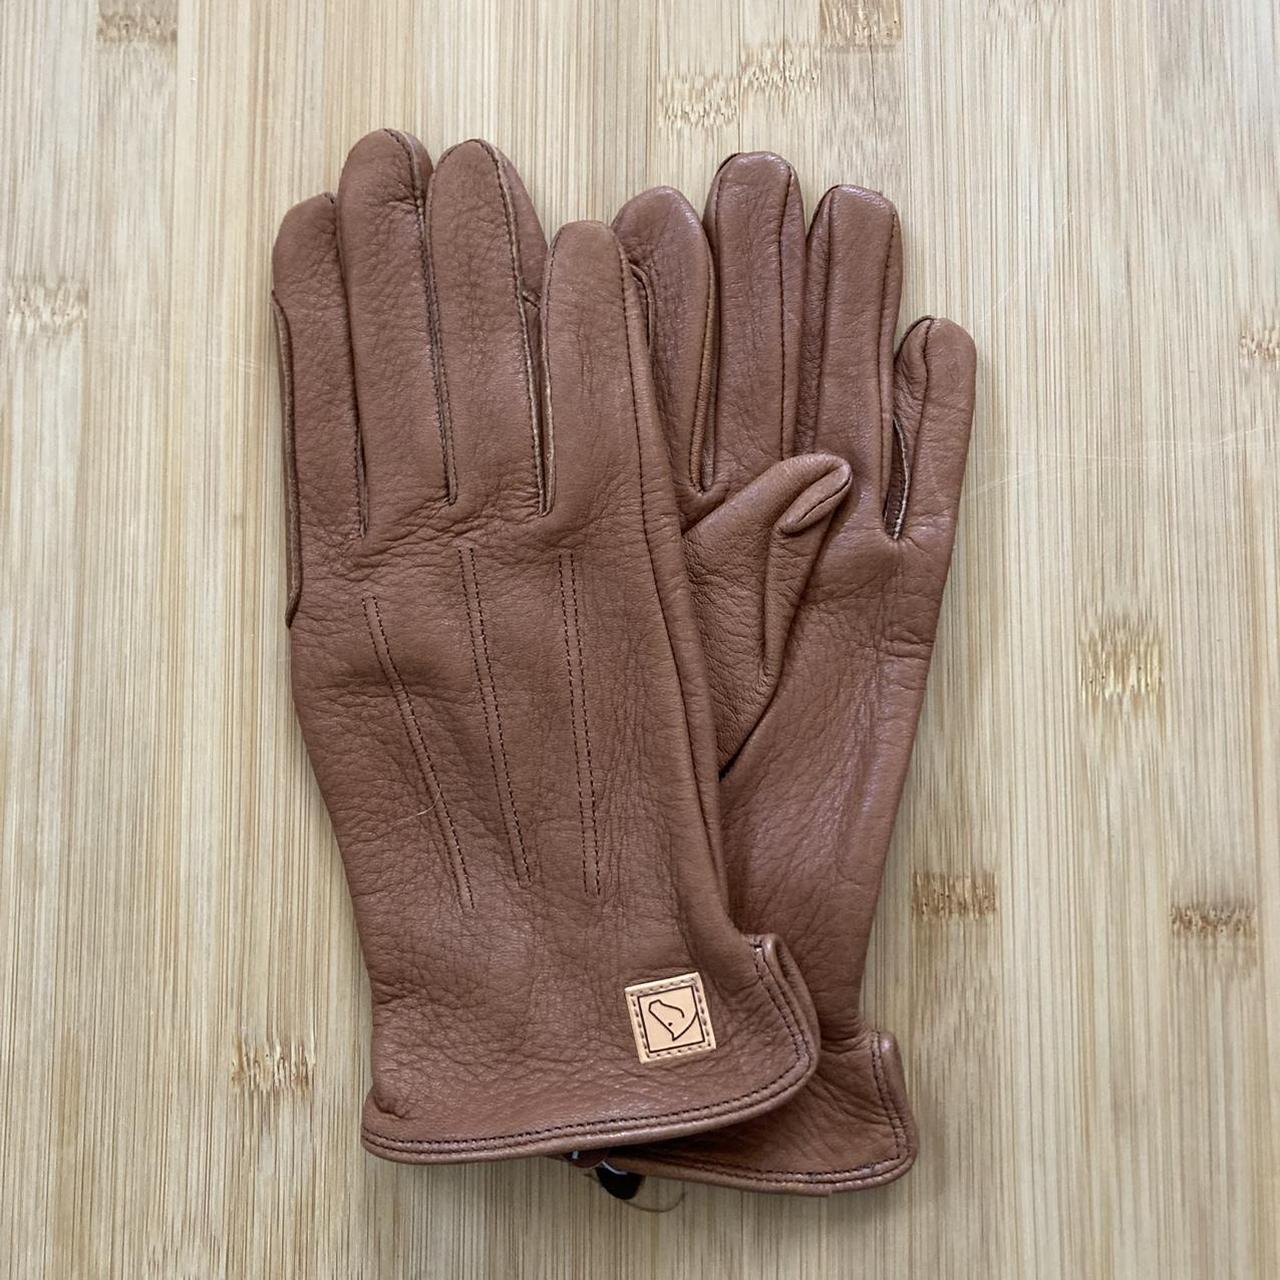 Product Image 3 - SSG riding gloves. Style 2300.